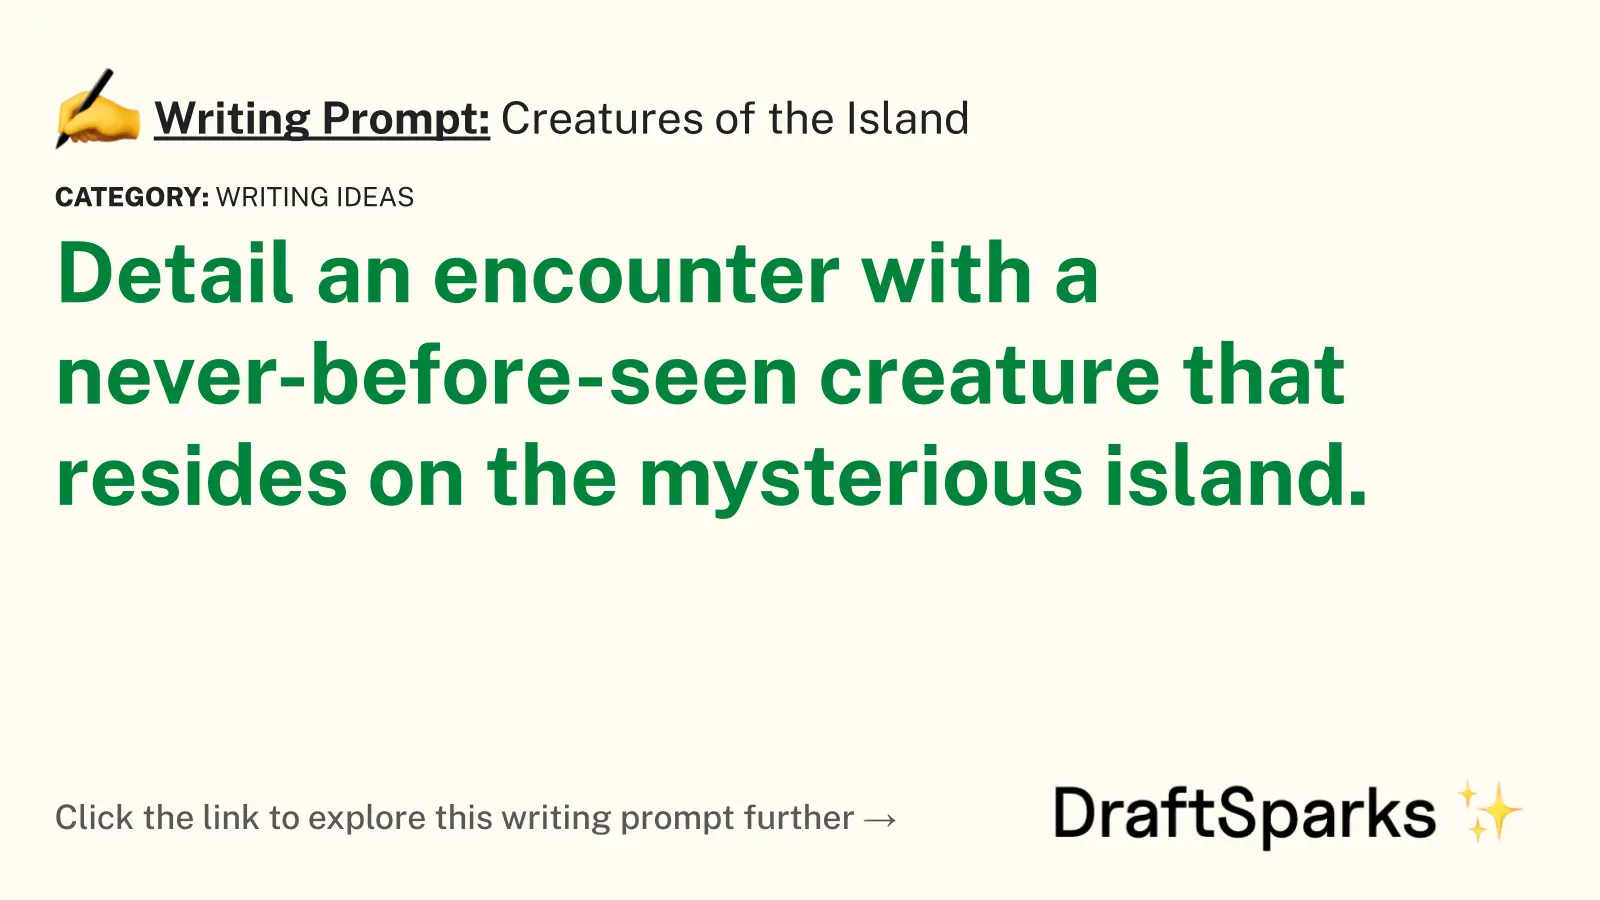 Creatures of the Island